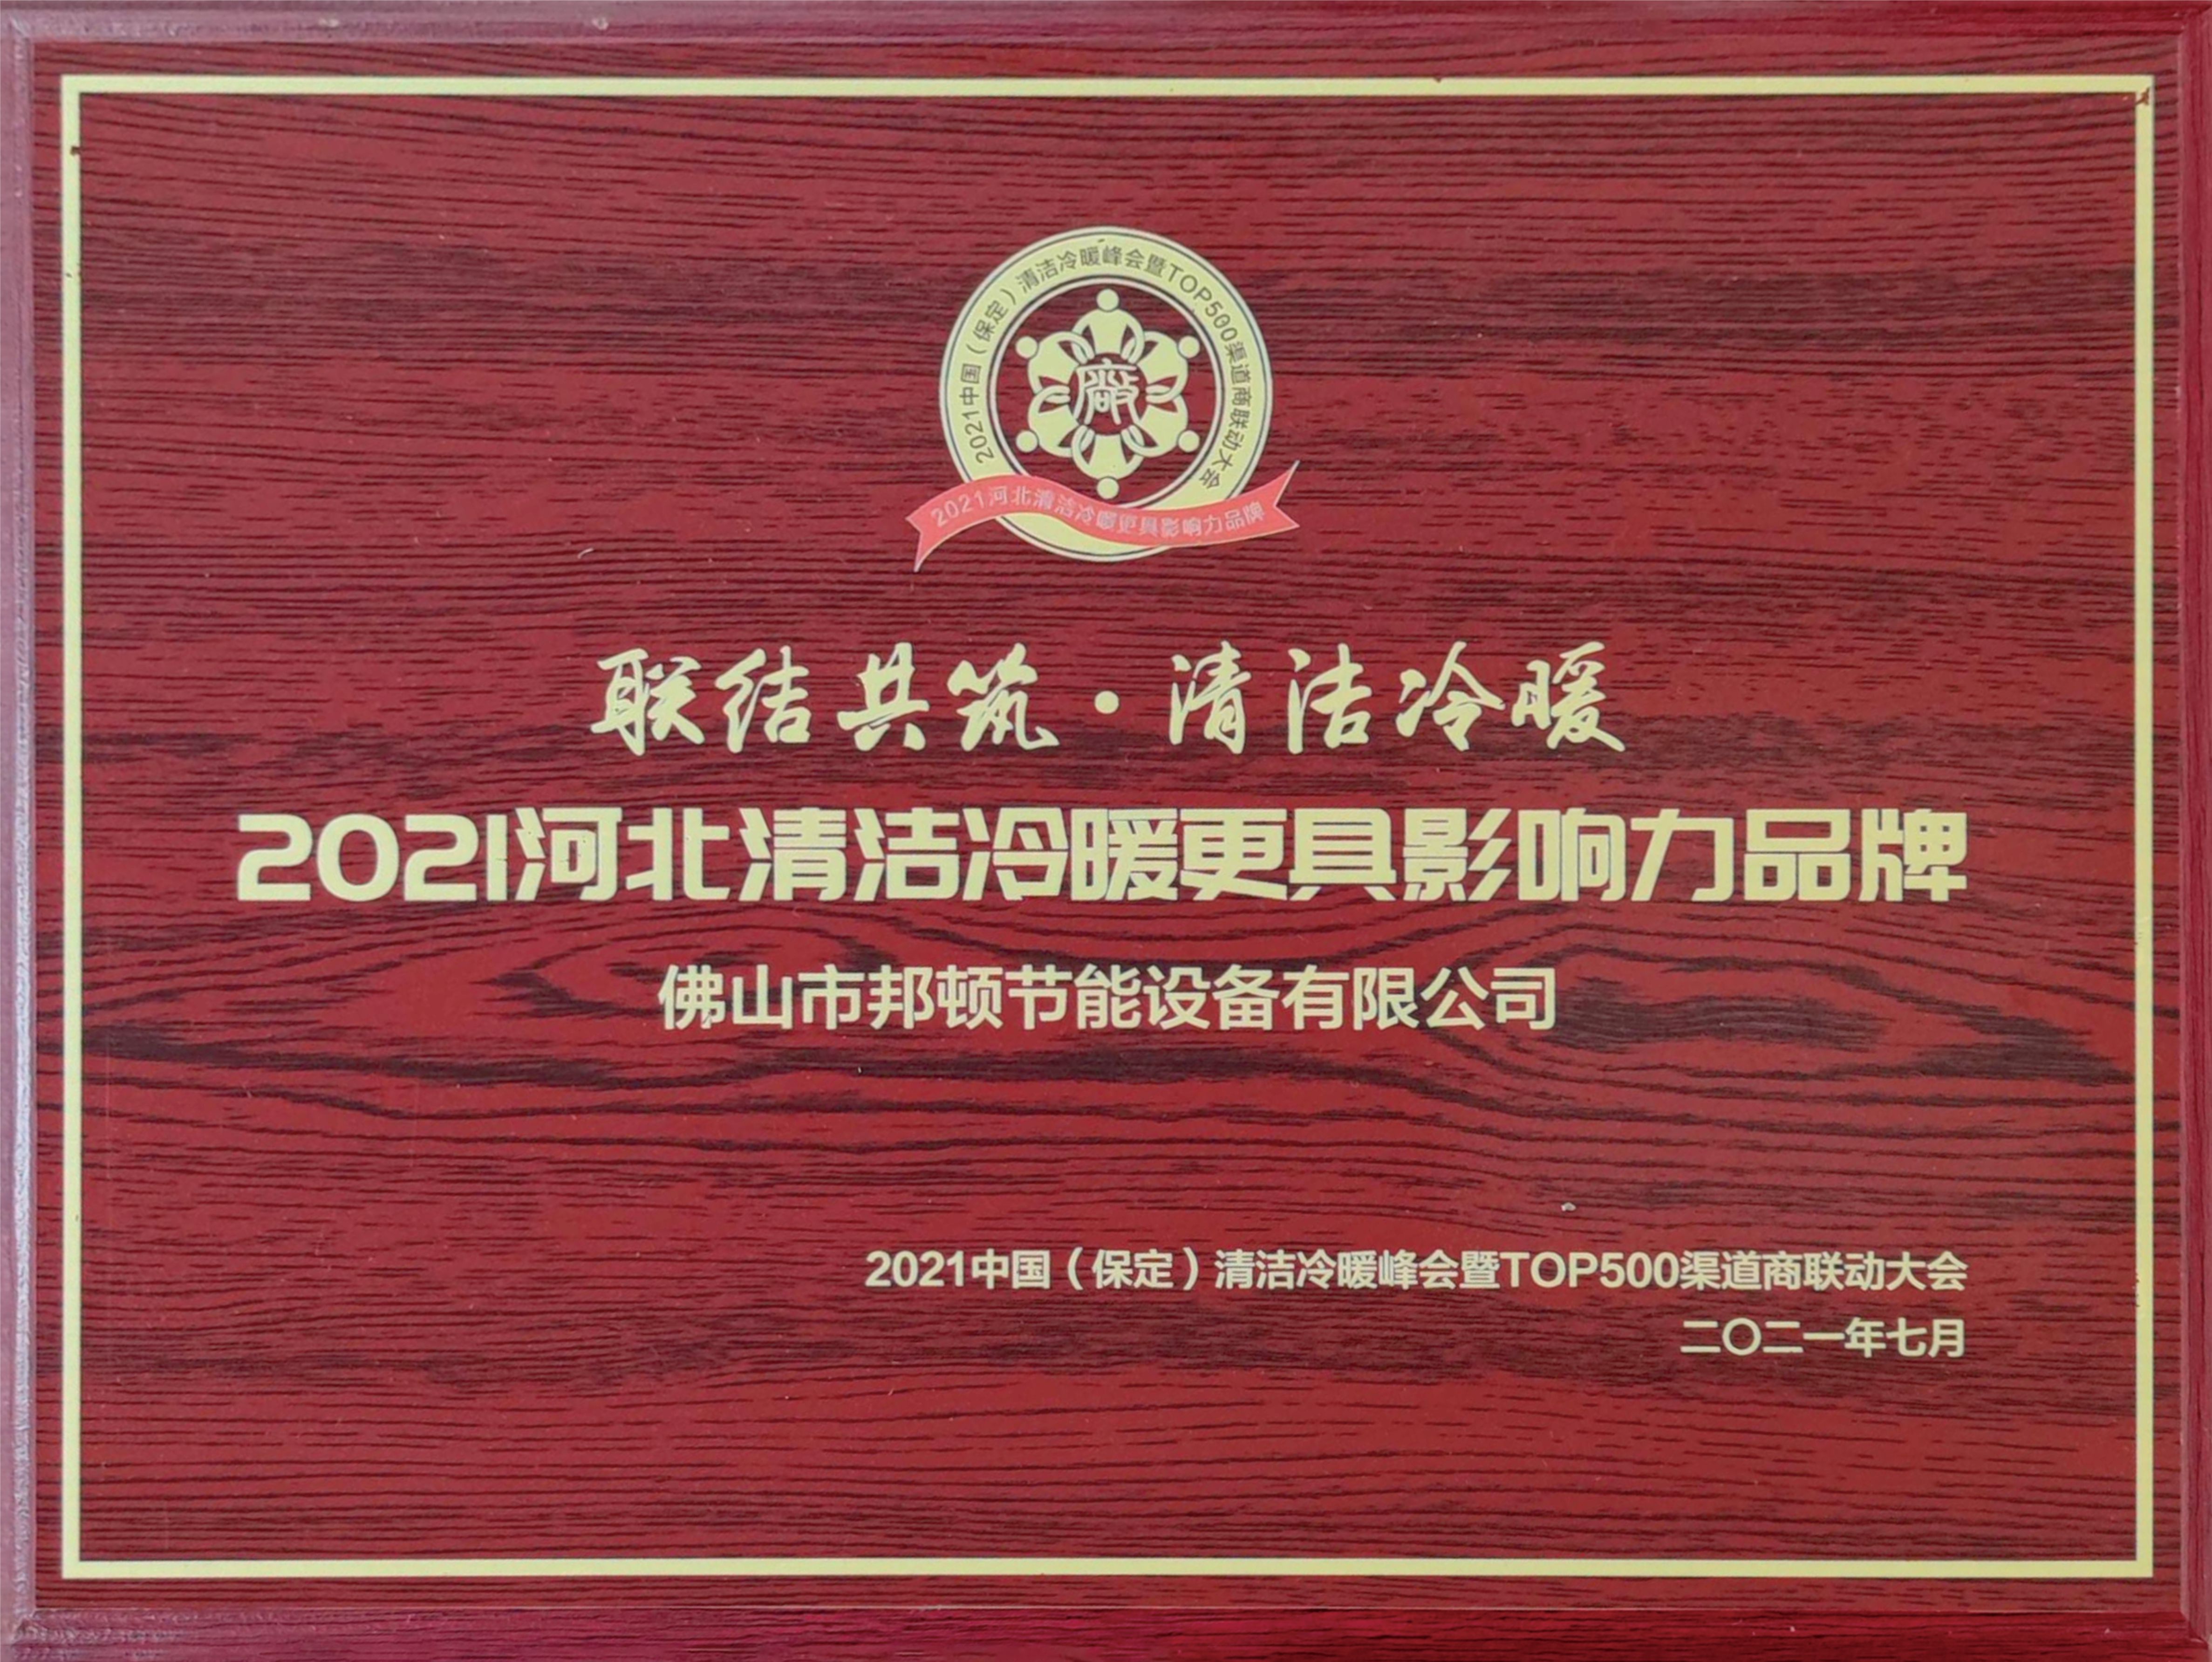 2021: a More Influential Brand in Hebei Clean Heating and Cooling